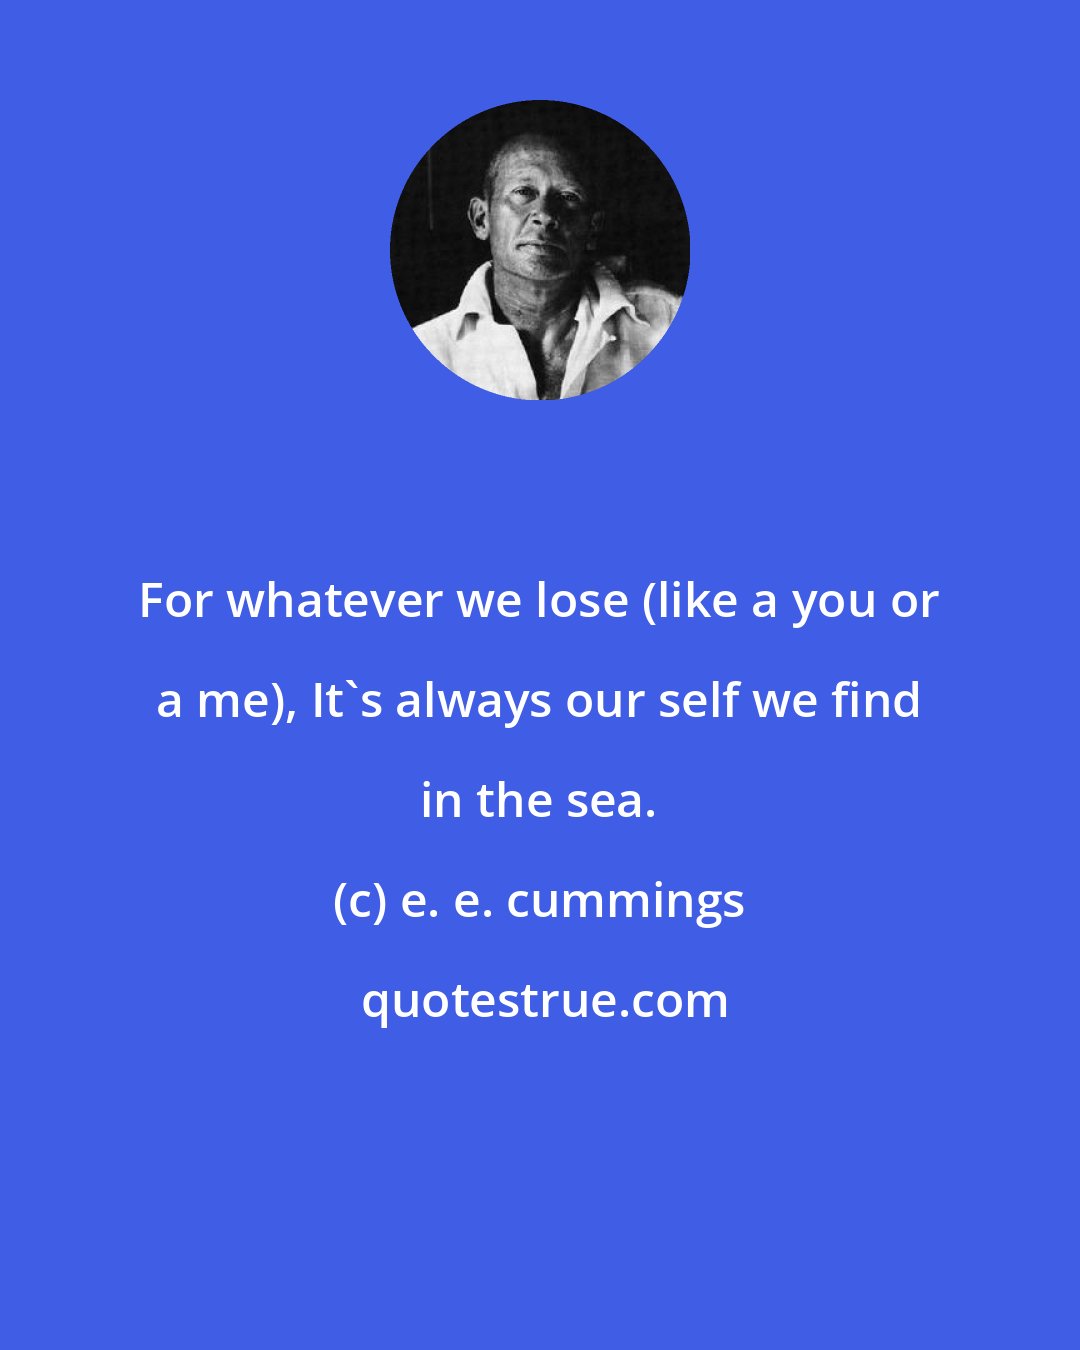 e. e. cummings: For whatever we lose (like a you or a me), It's always our self we find in the sea.